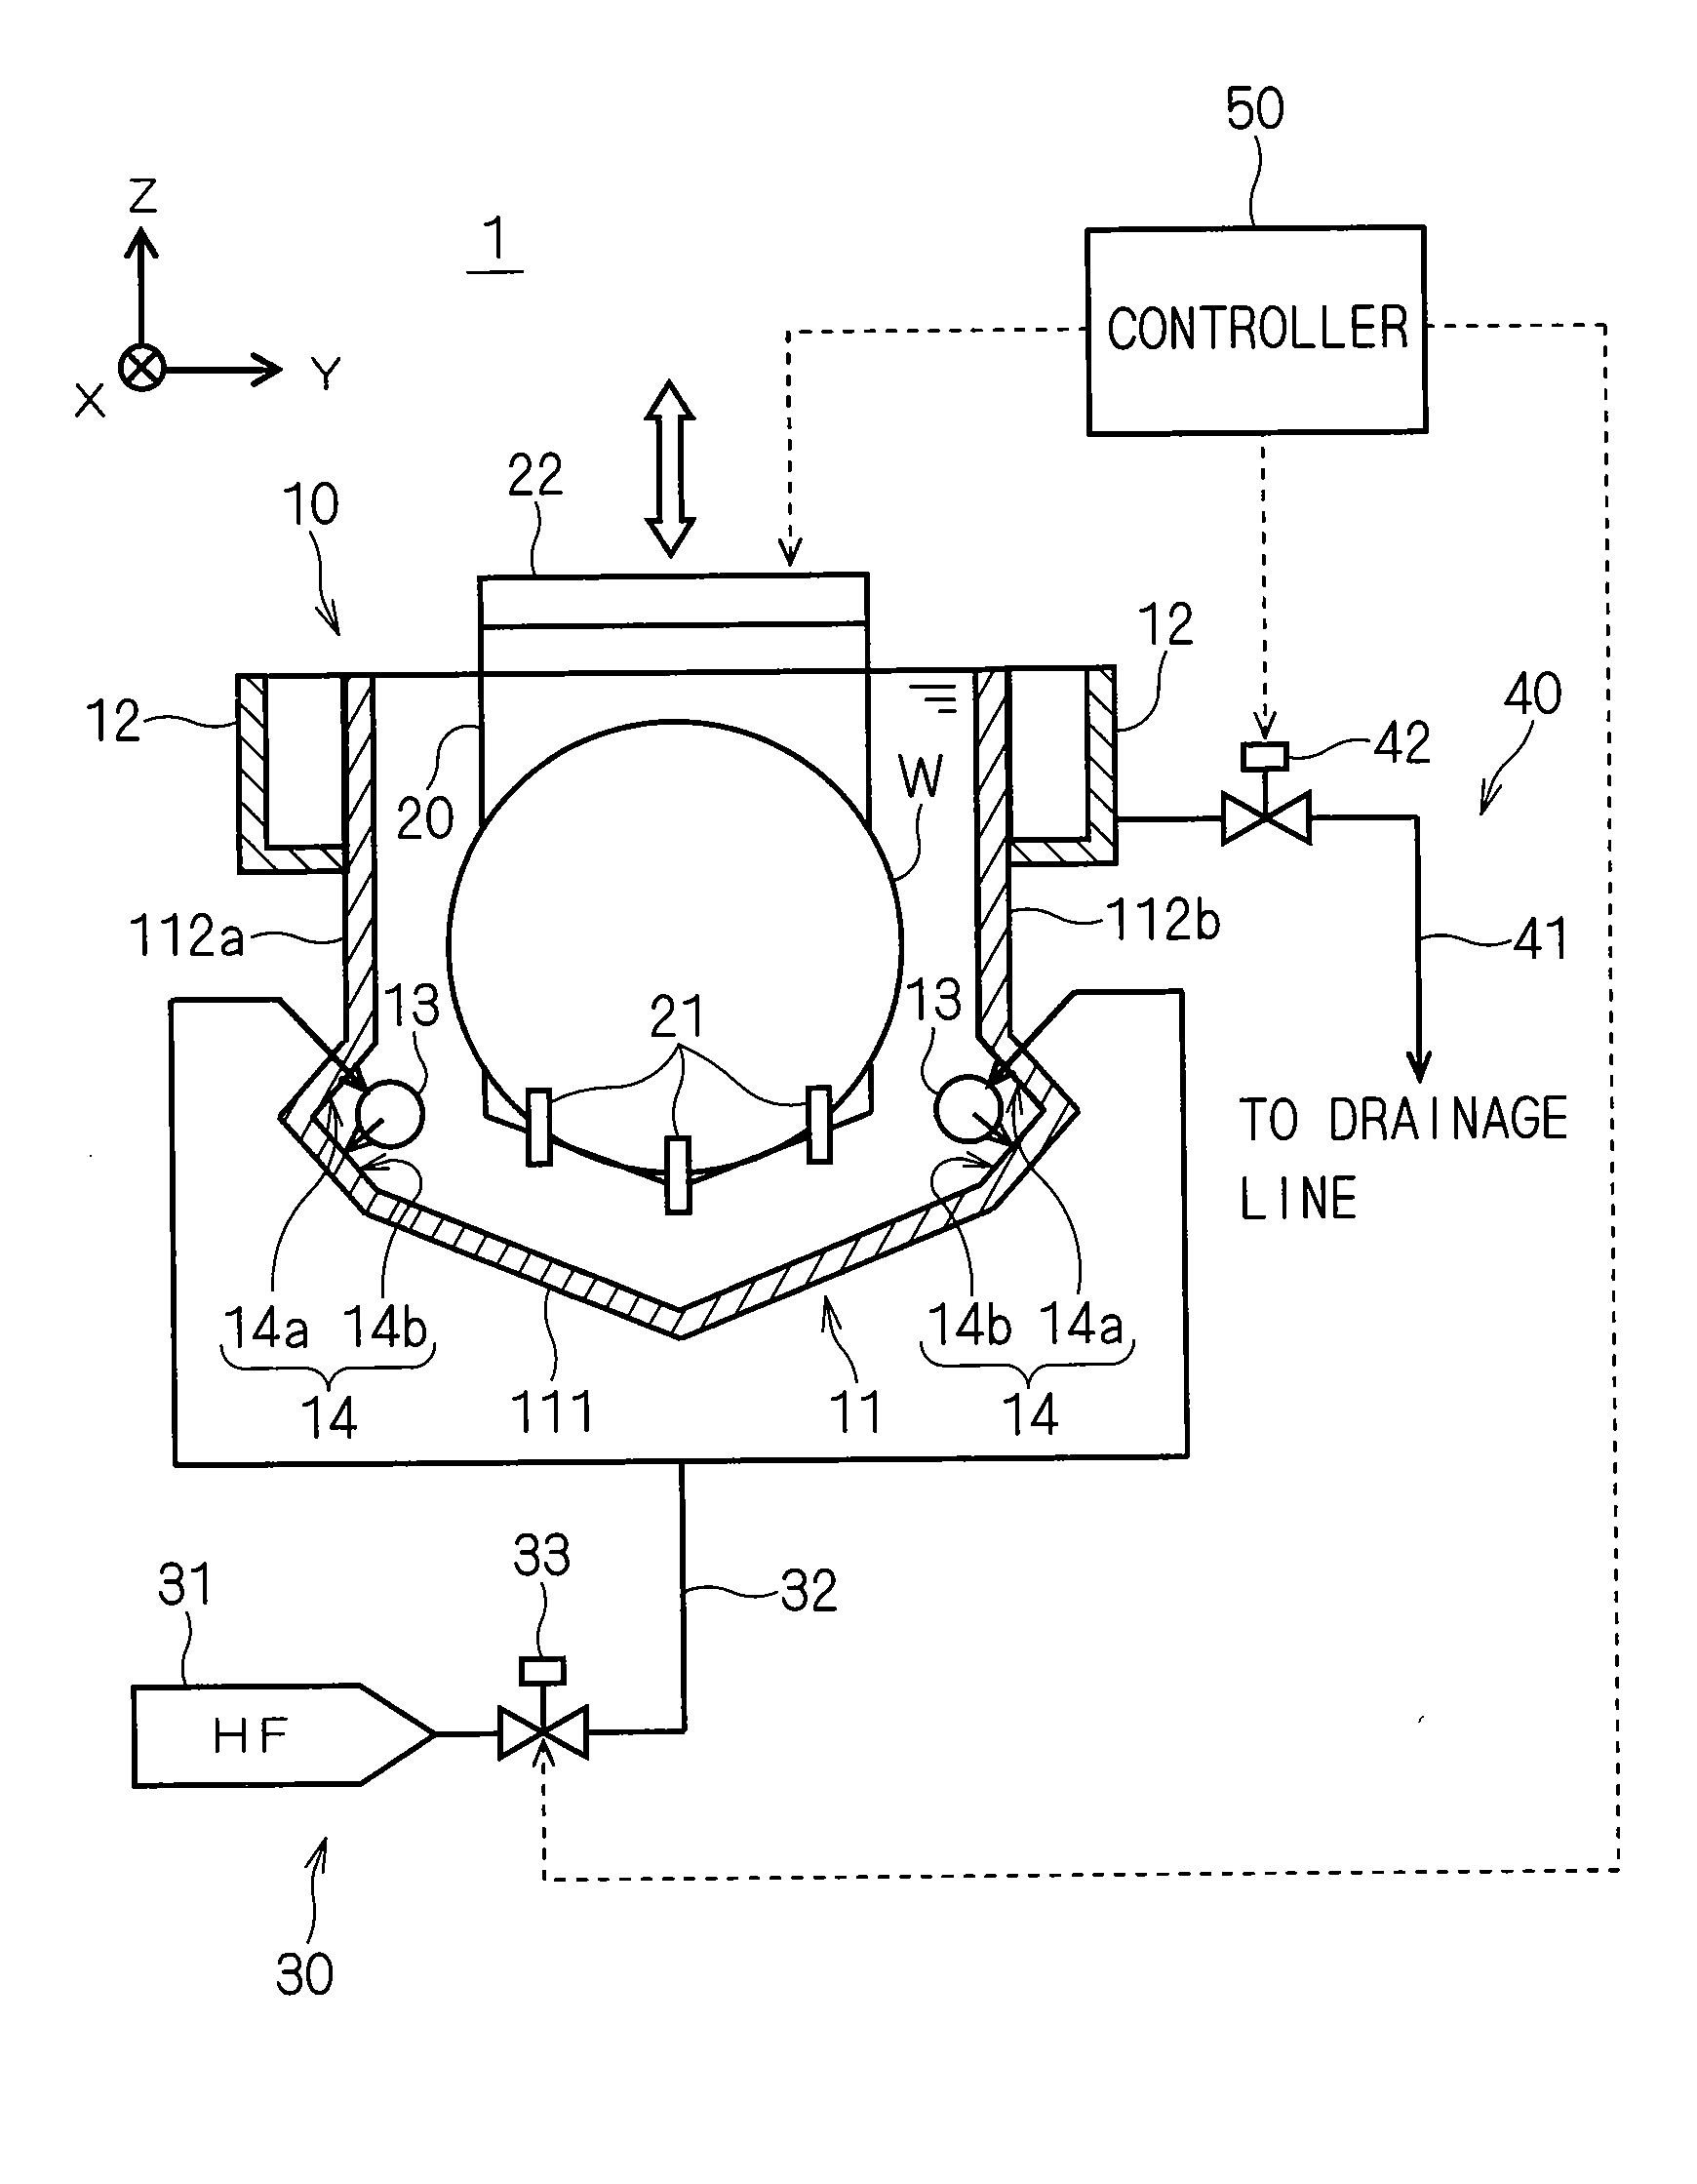 Apparatus for and method of processing substrate